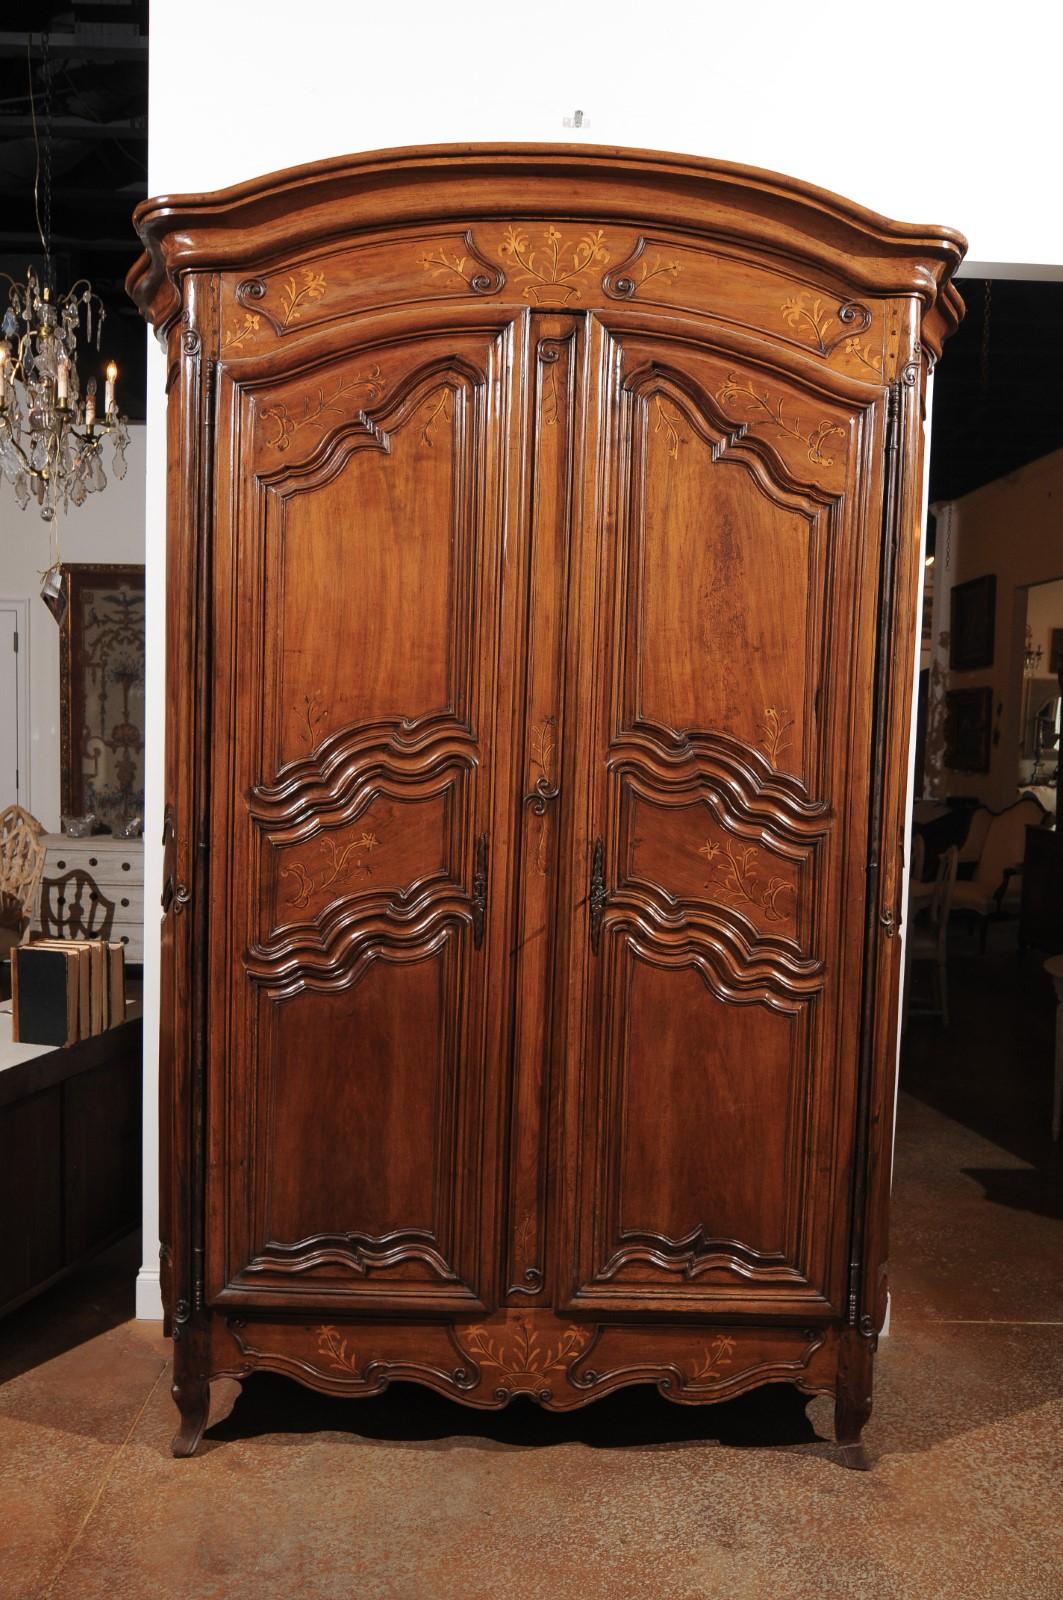 A French Louis XV period 18th century walnut armoire from the Rhône Valley, with floral inlay and curved sides. Born in France during the second quarter of the 18th century, this exquisite walnut armoire features a delicately arching molded cornice